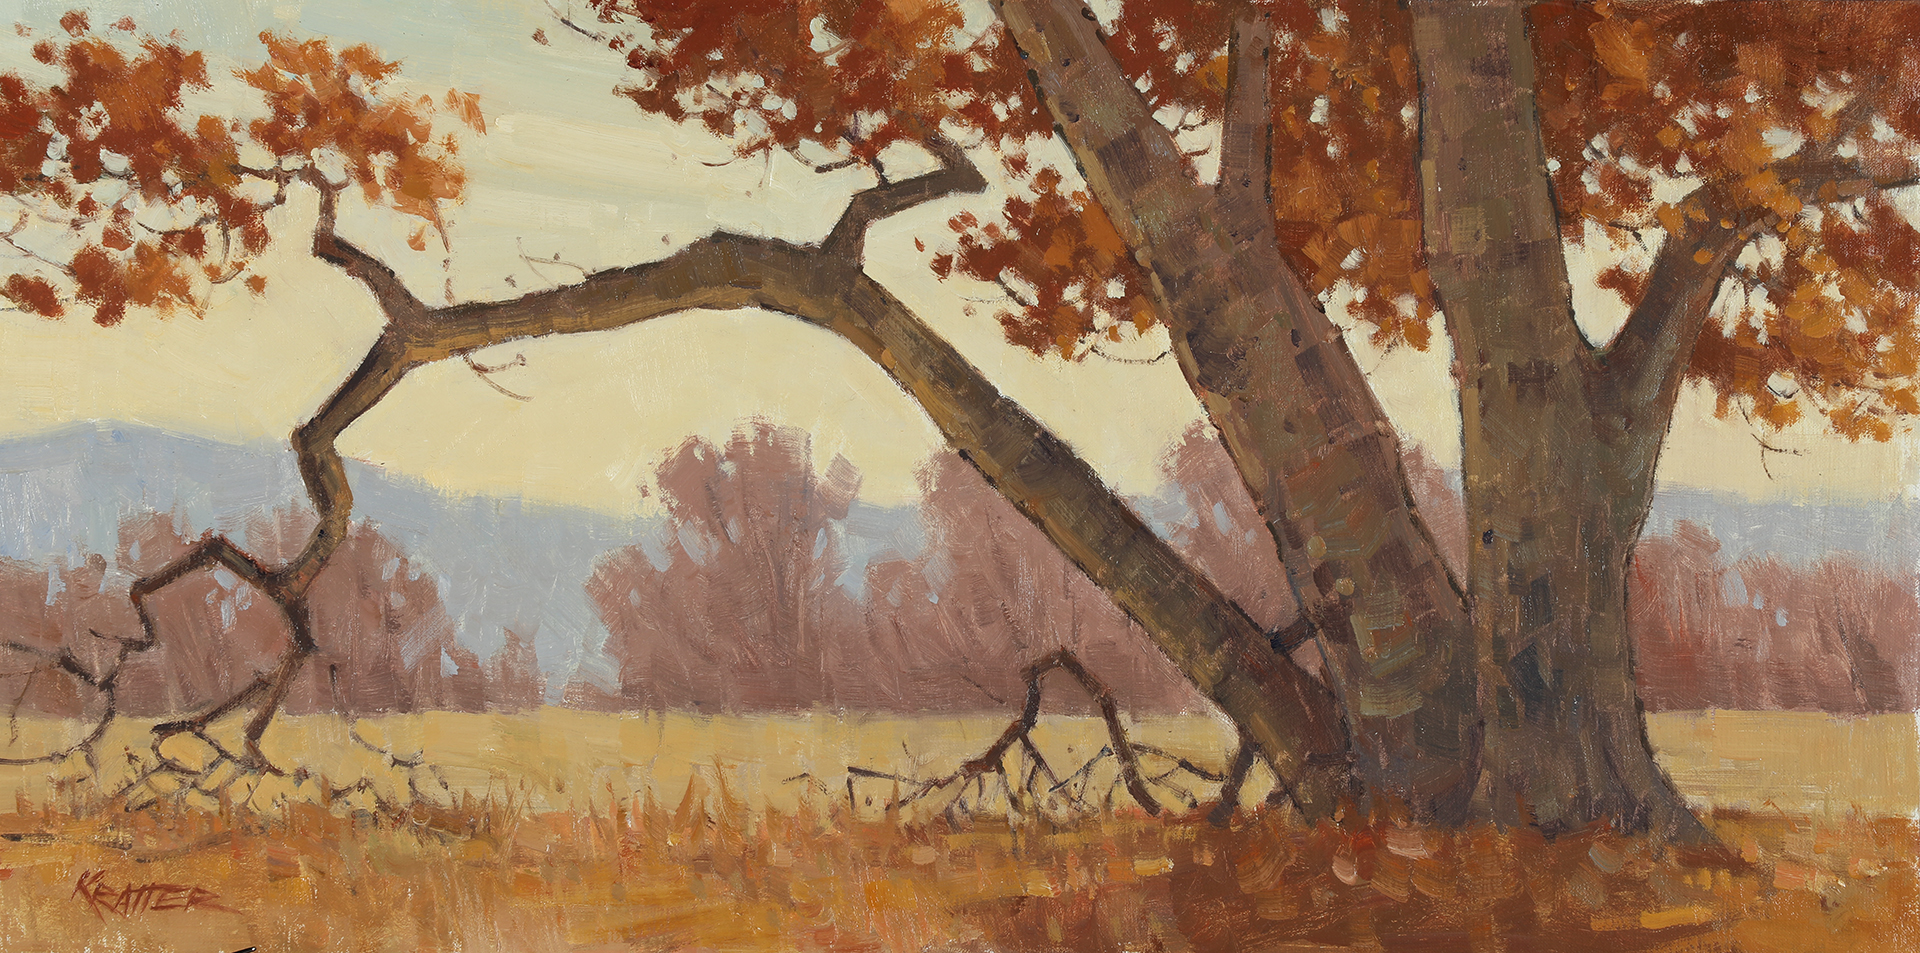 Paul Kratter, “Reaching Out,” 10 x 20 in., oil on linen panel, plein air, private collection